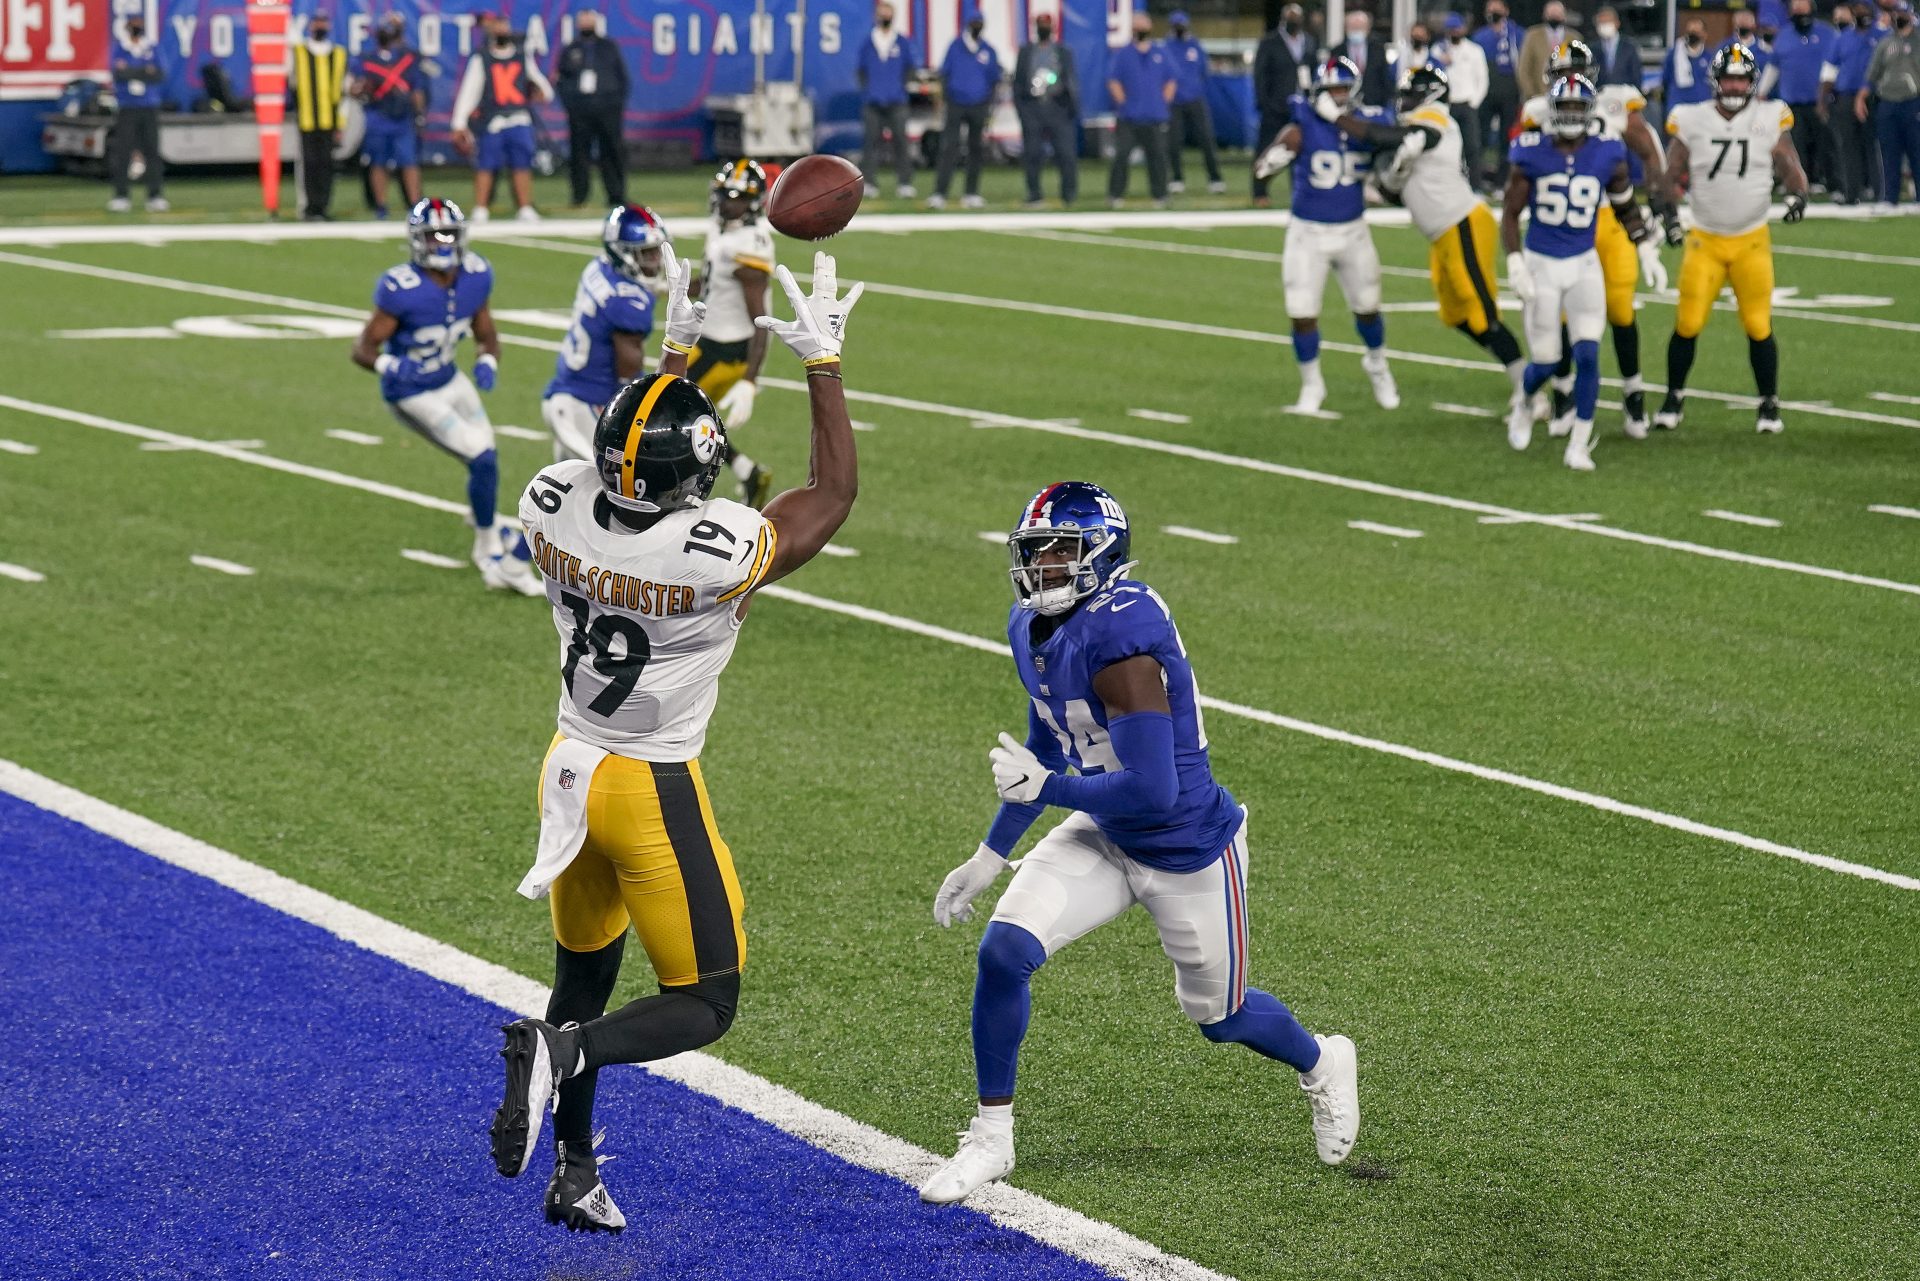 Pittsburgh Steelers wide receiver JuJu Smith-Schuster (19) comes down with a touchdown pass against New York Giants cornerback James Bradberry (24) during the fourth quarter of an NFL football game Monday, Sept. 14, 2020, in East Rutherford, N.J.